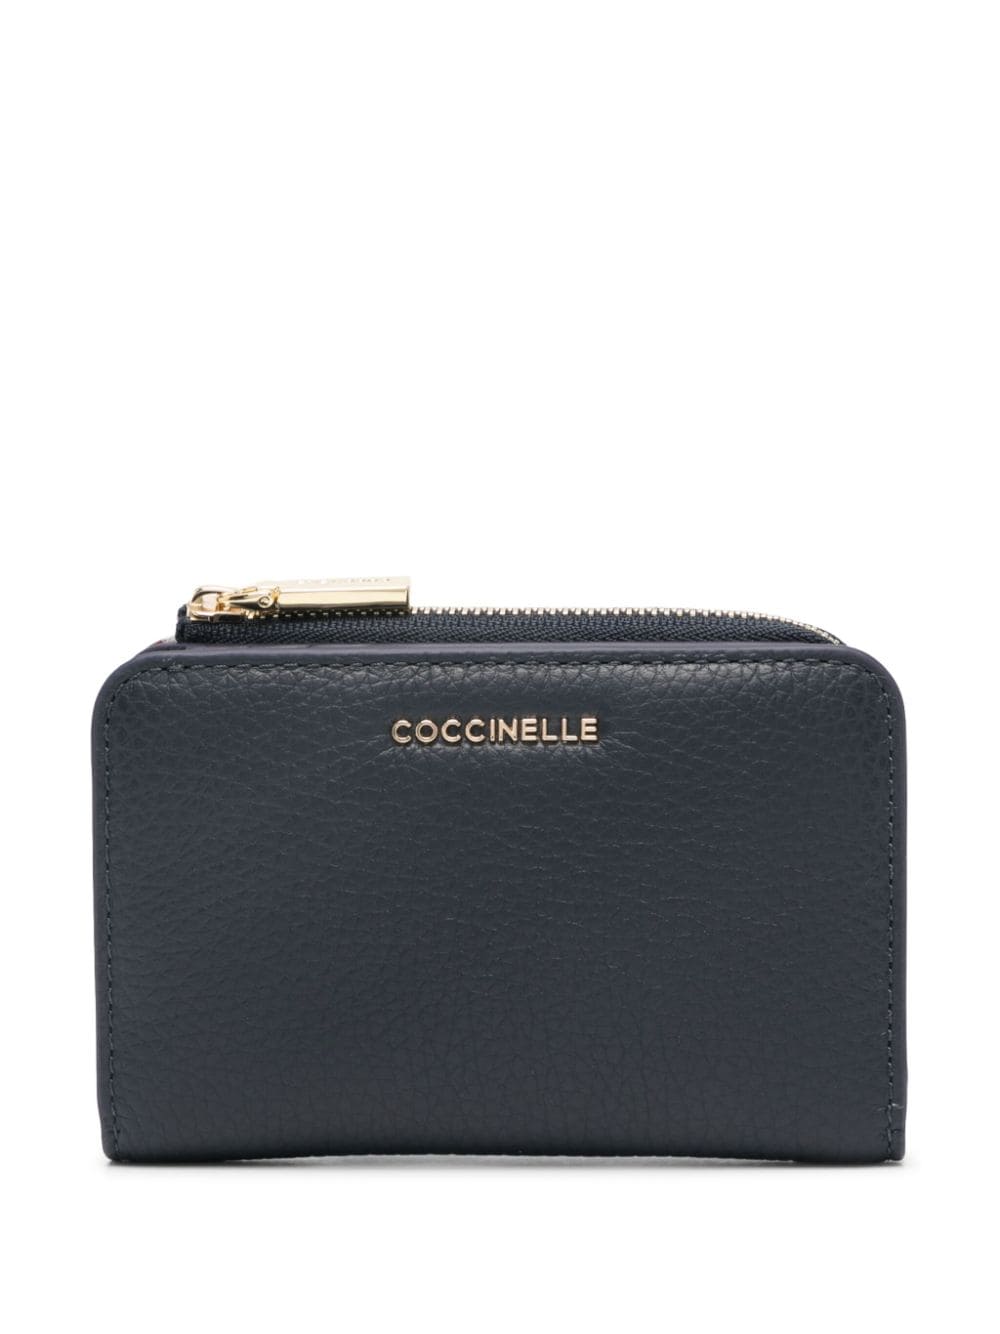 Coccinelle small Metallic Soft leather wallet - Blau